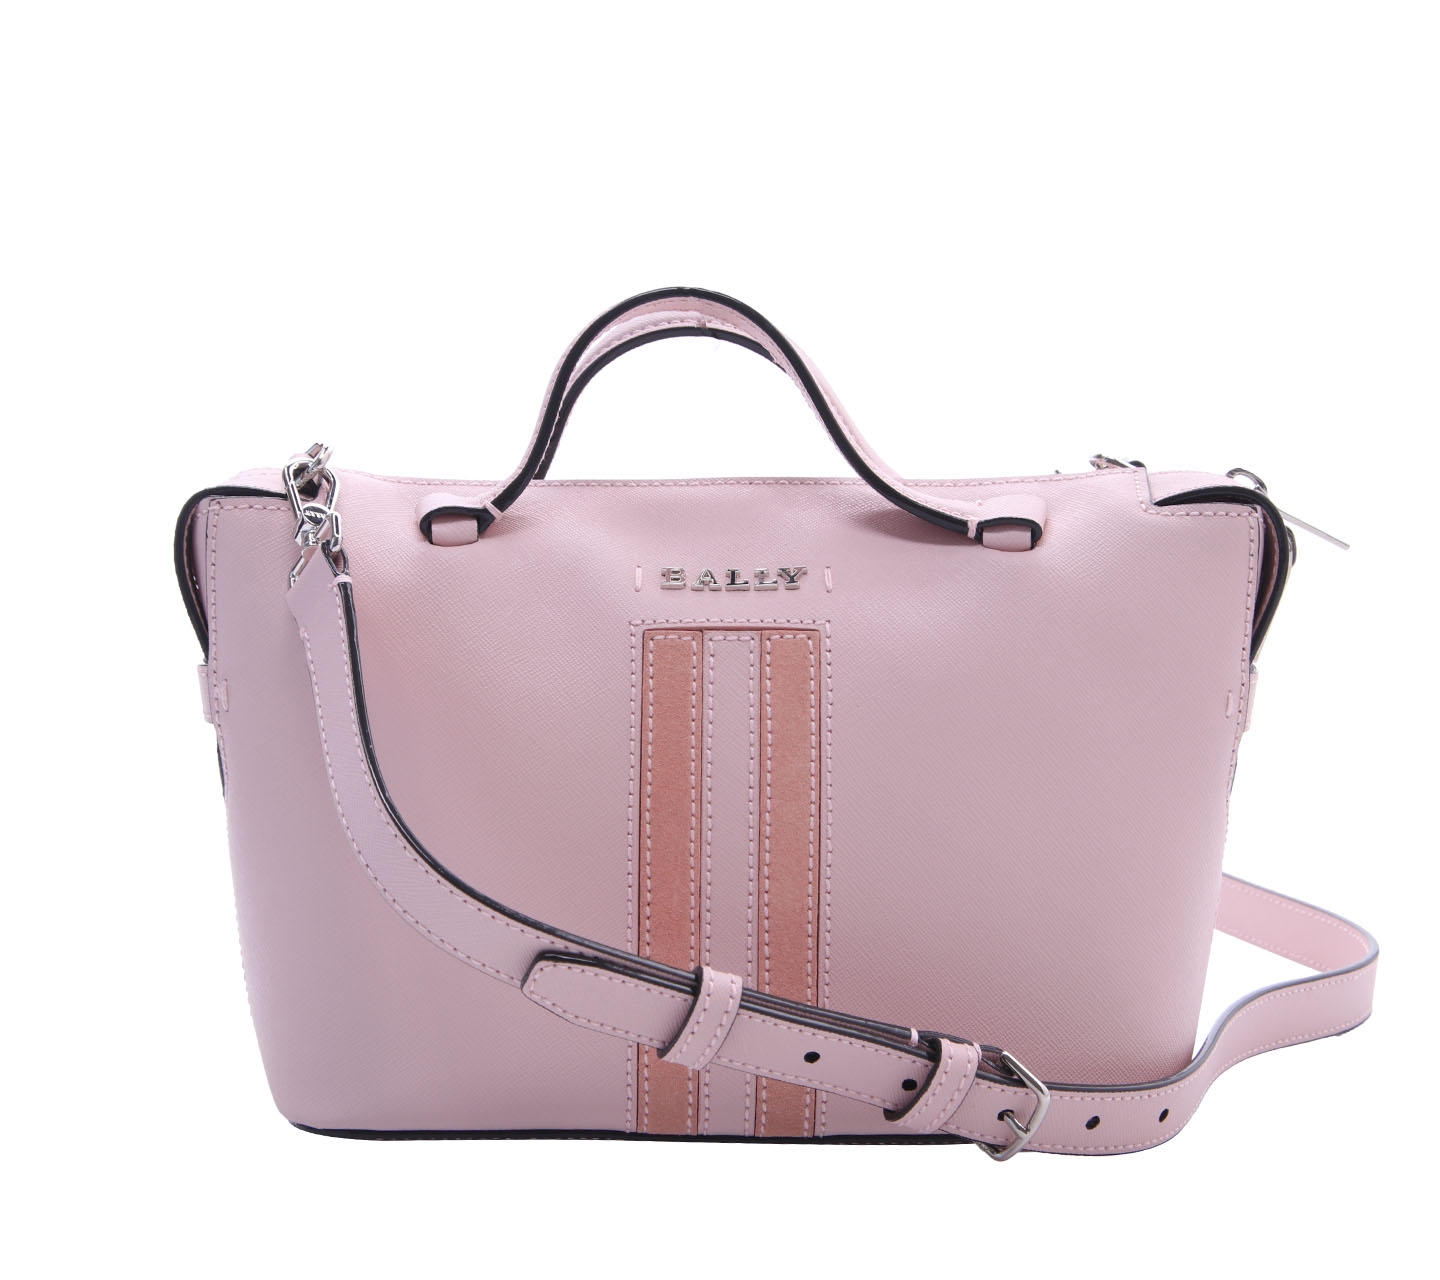 Bally Pink Leather Satchel